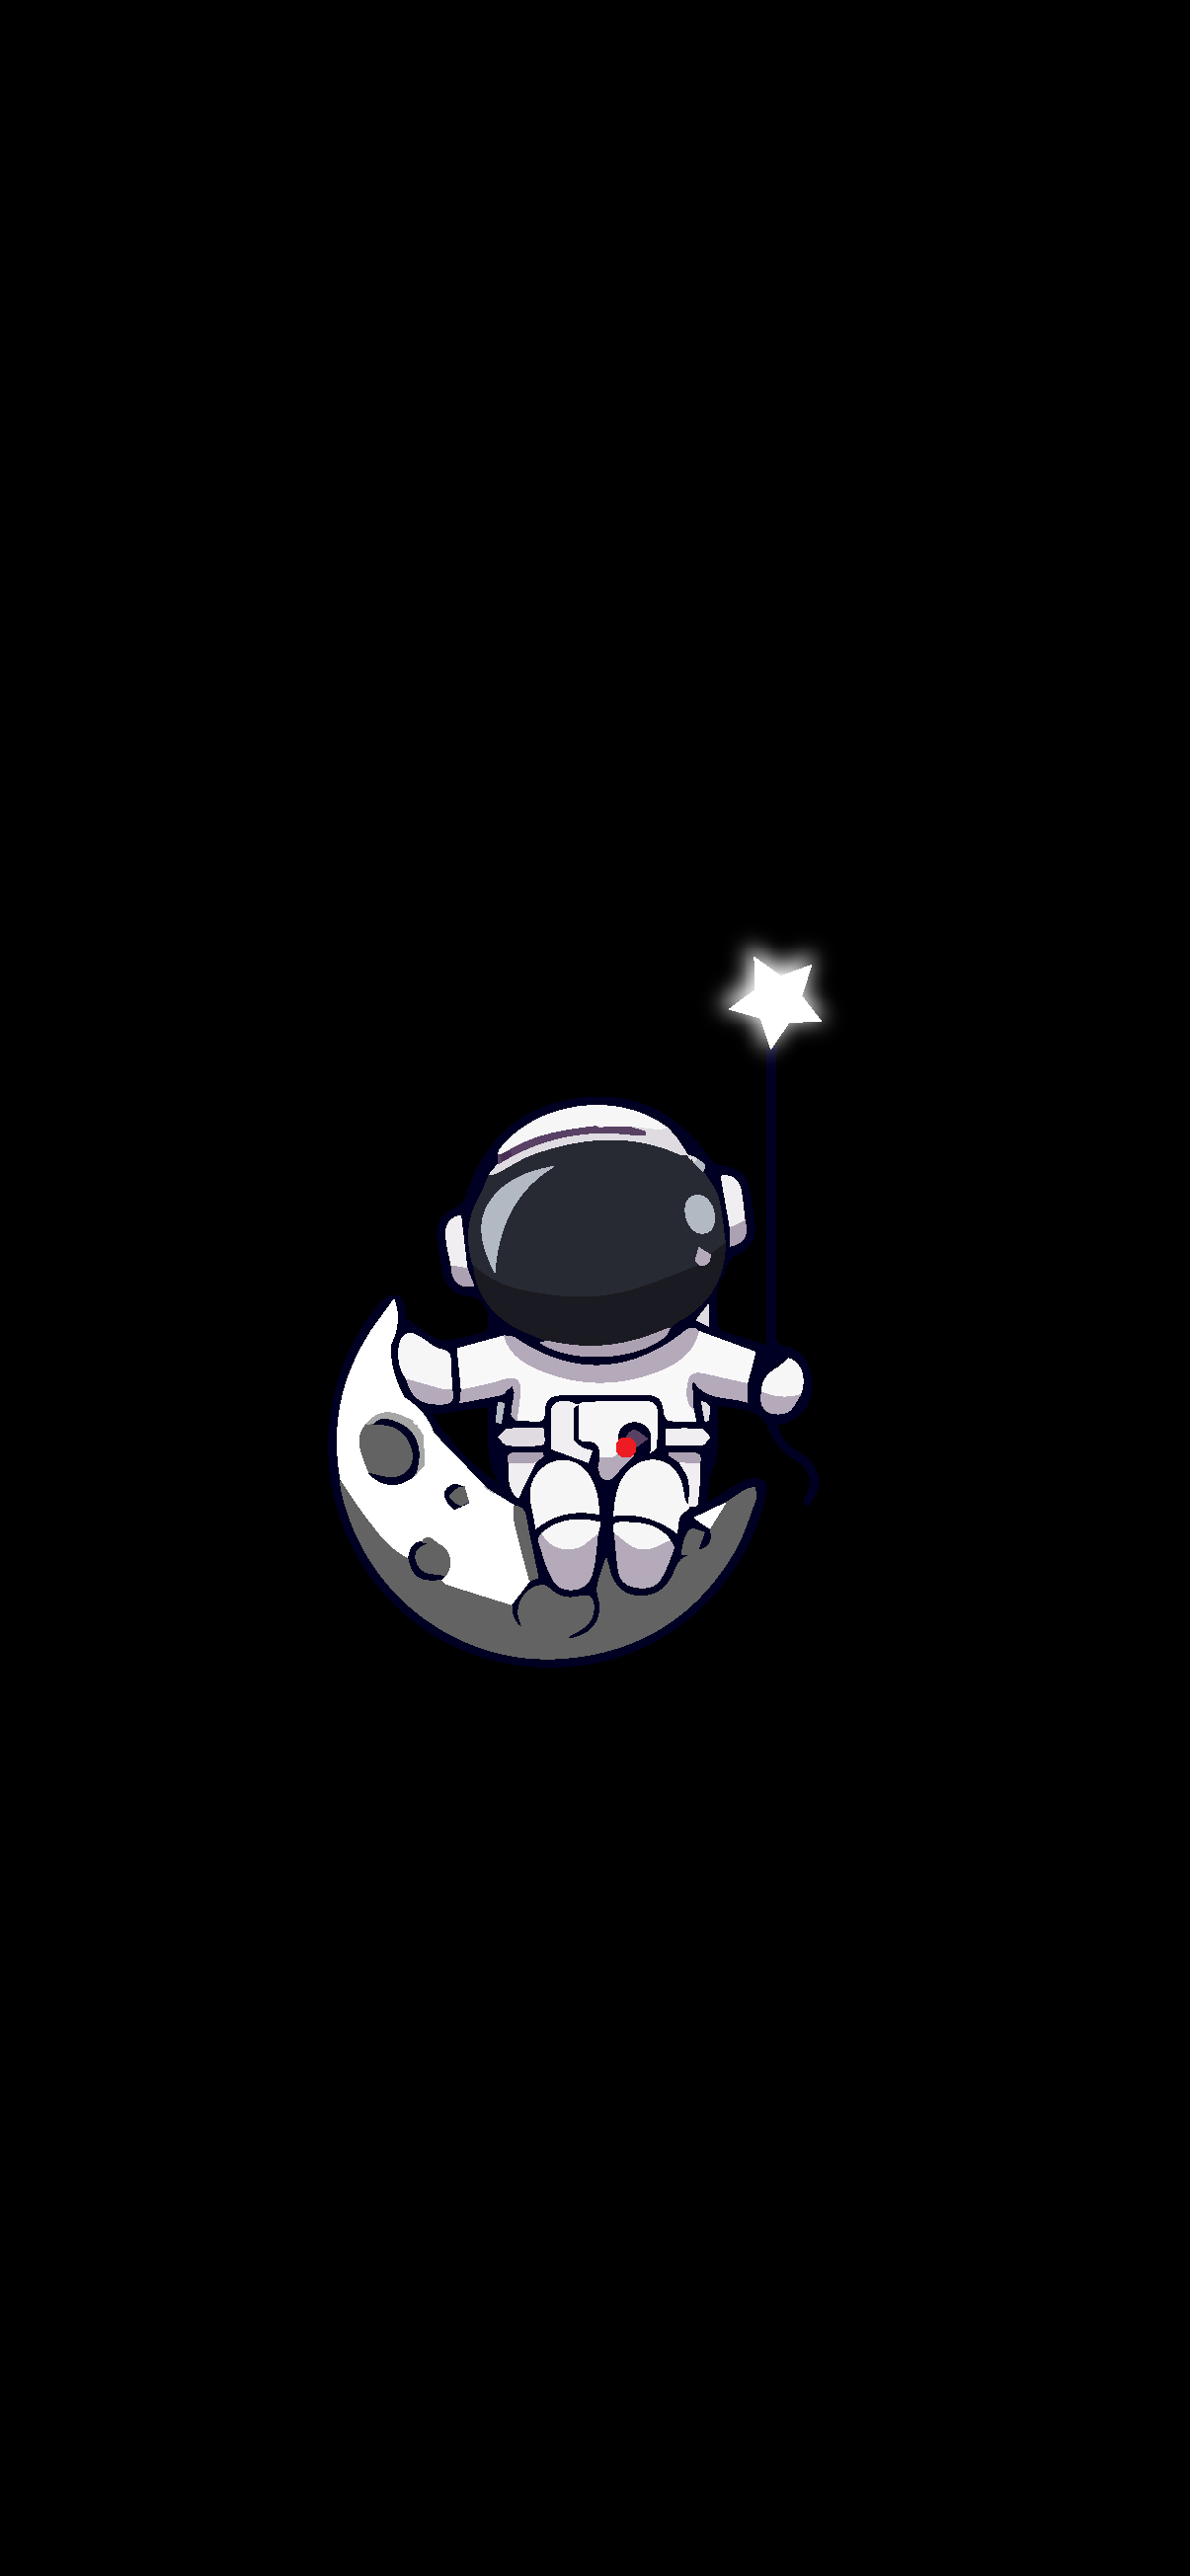 Rabbithome Space Astronaut Poster for Aesthetic Room Decor Merch Art Wall  Print Wallpaper for Bedroom for Teen Girls Boys 30  40cm  Amazonca Home